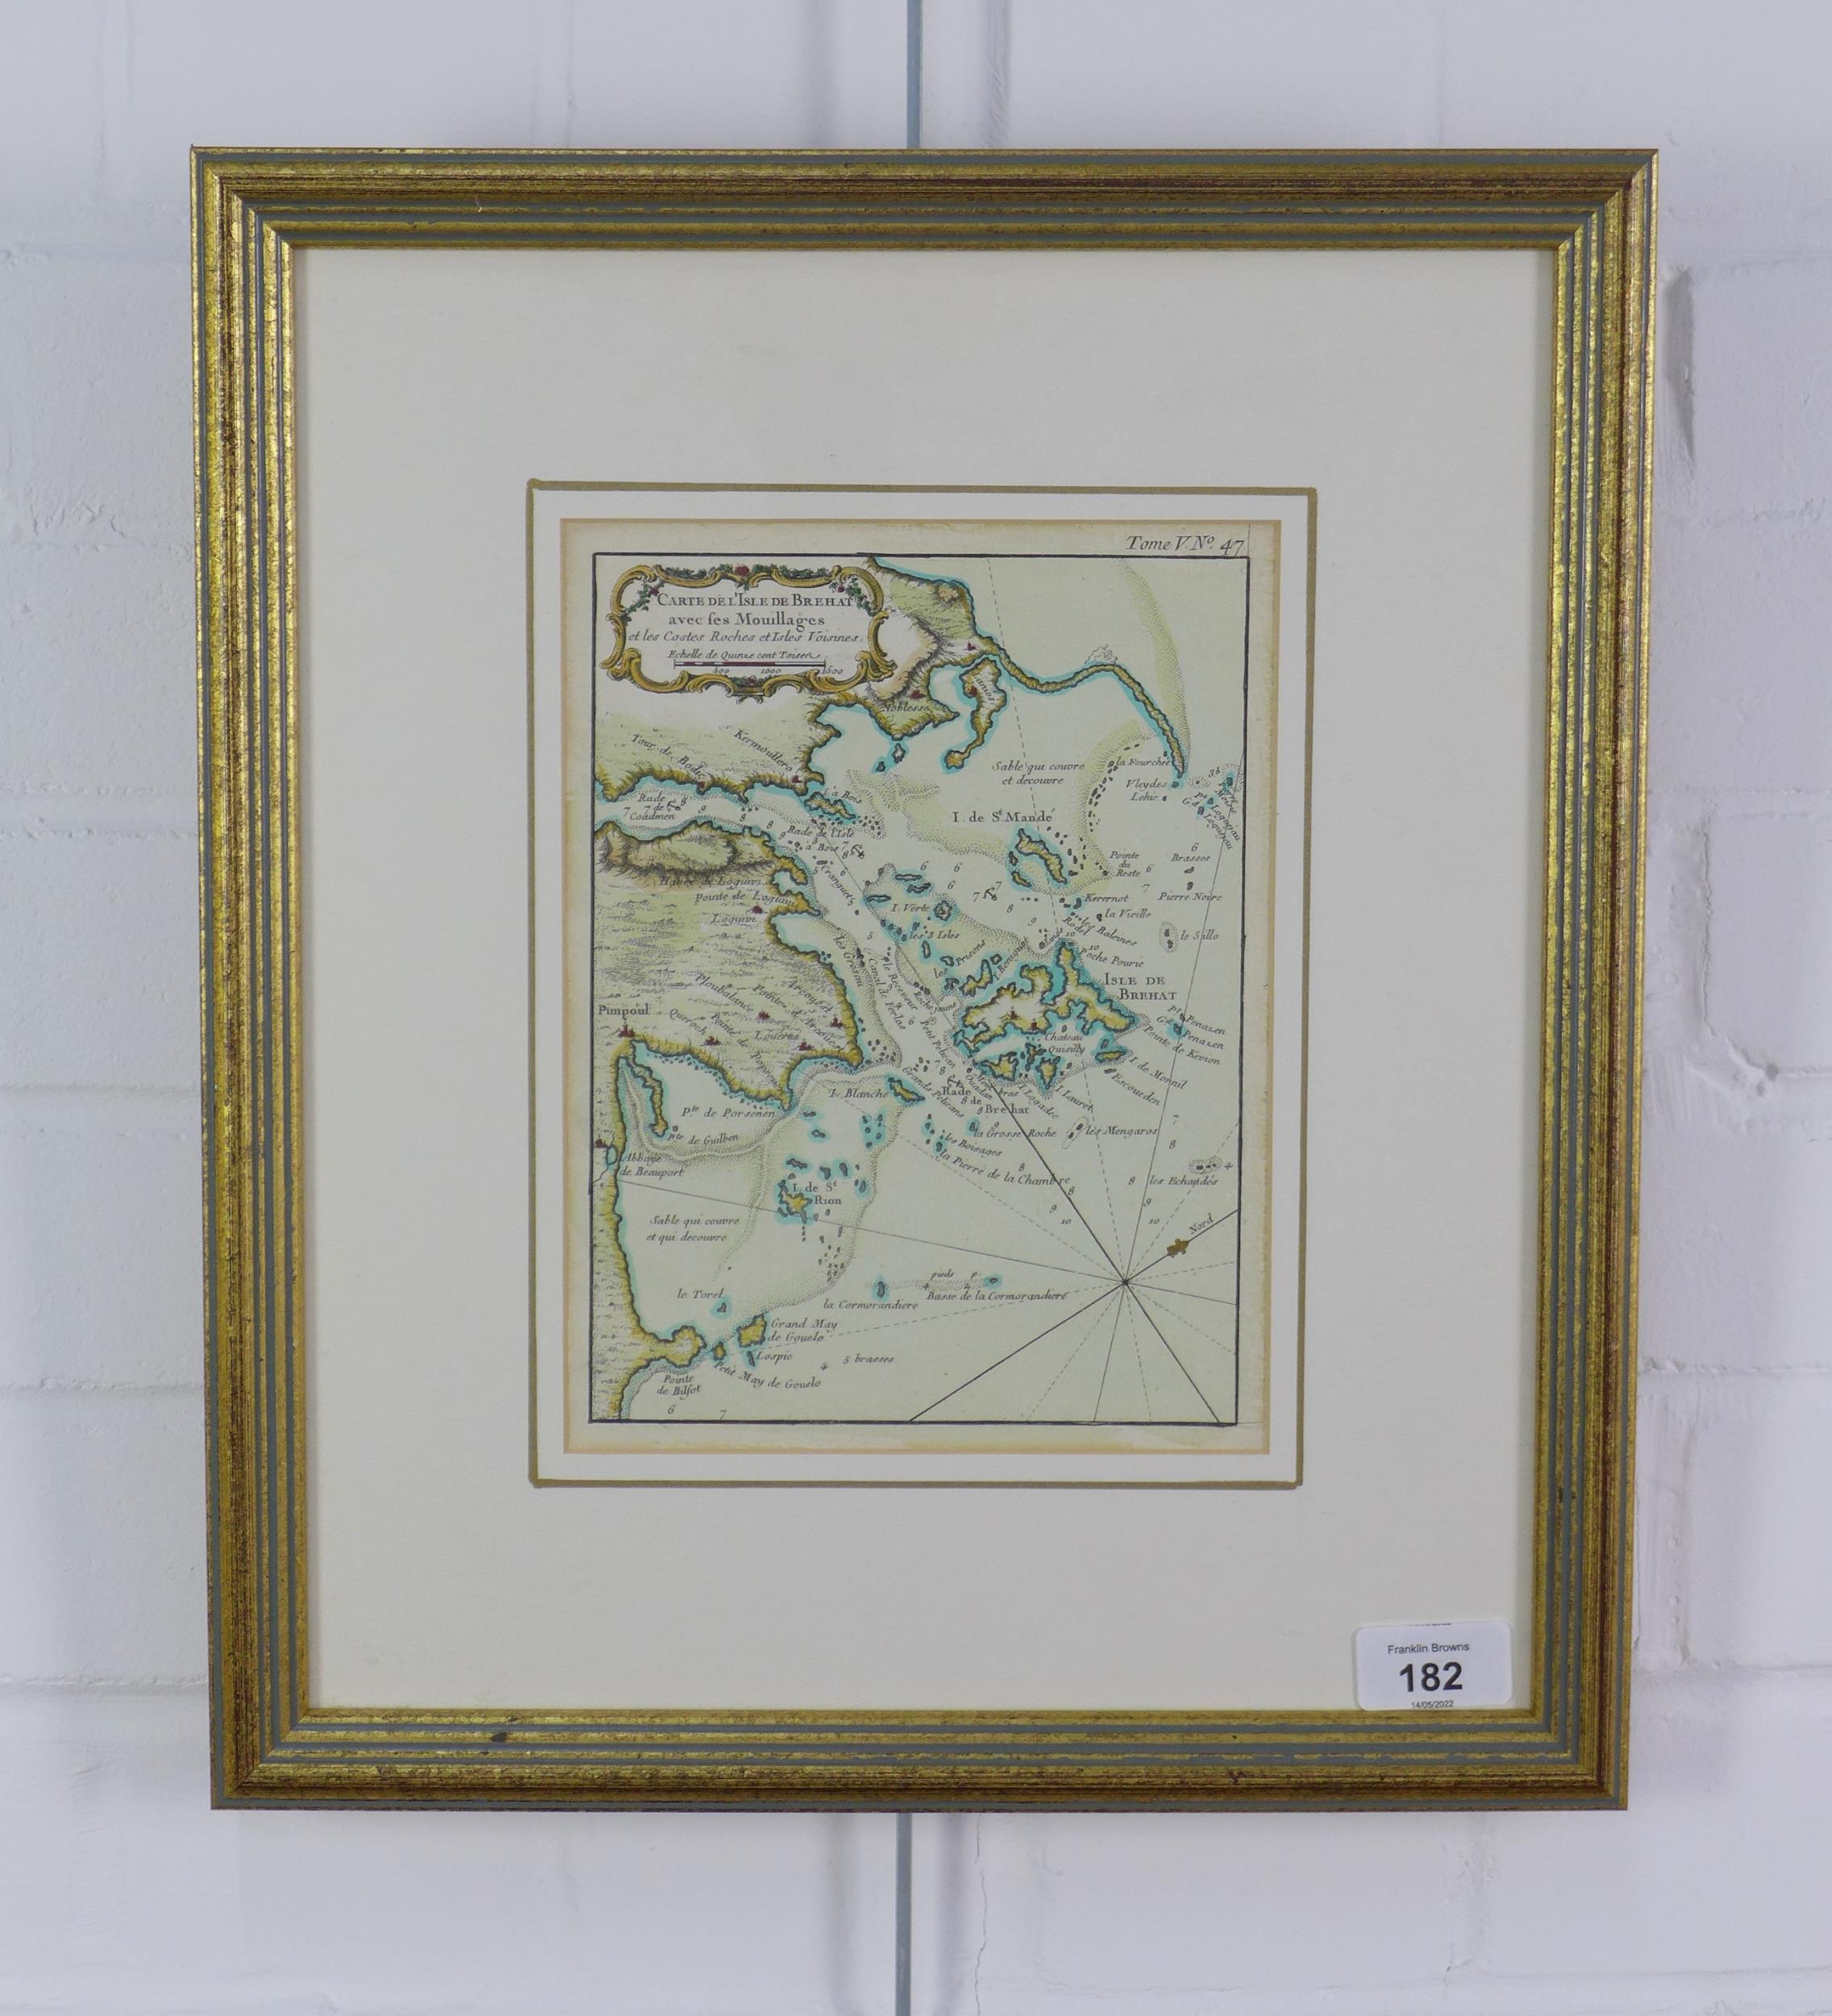 Isle de Brehad, After Bellin, a coloured map, framed under glass, 18 x 23cm - Image 2 of 2